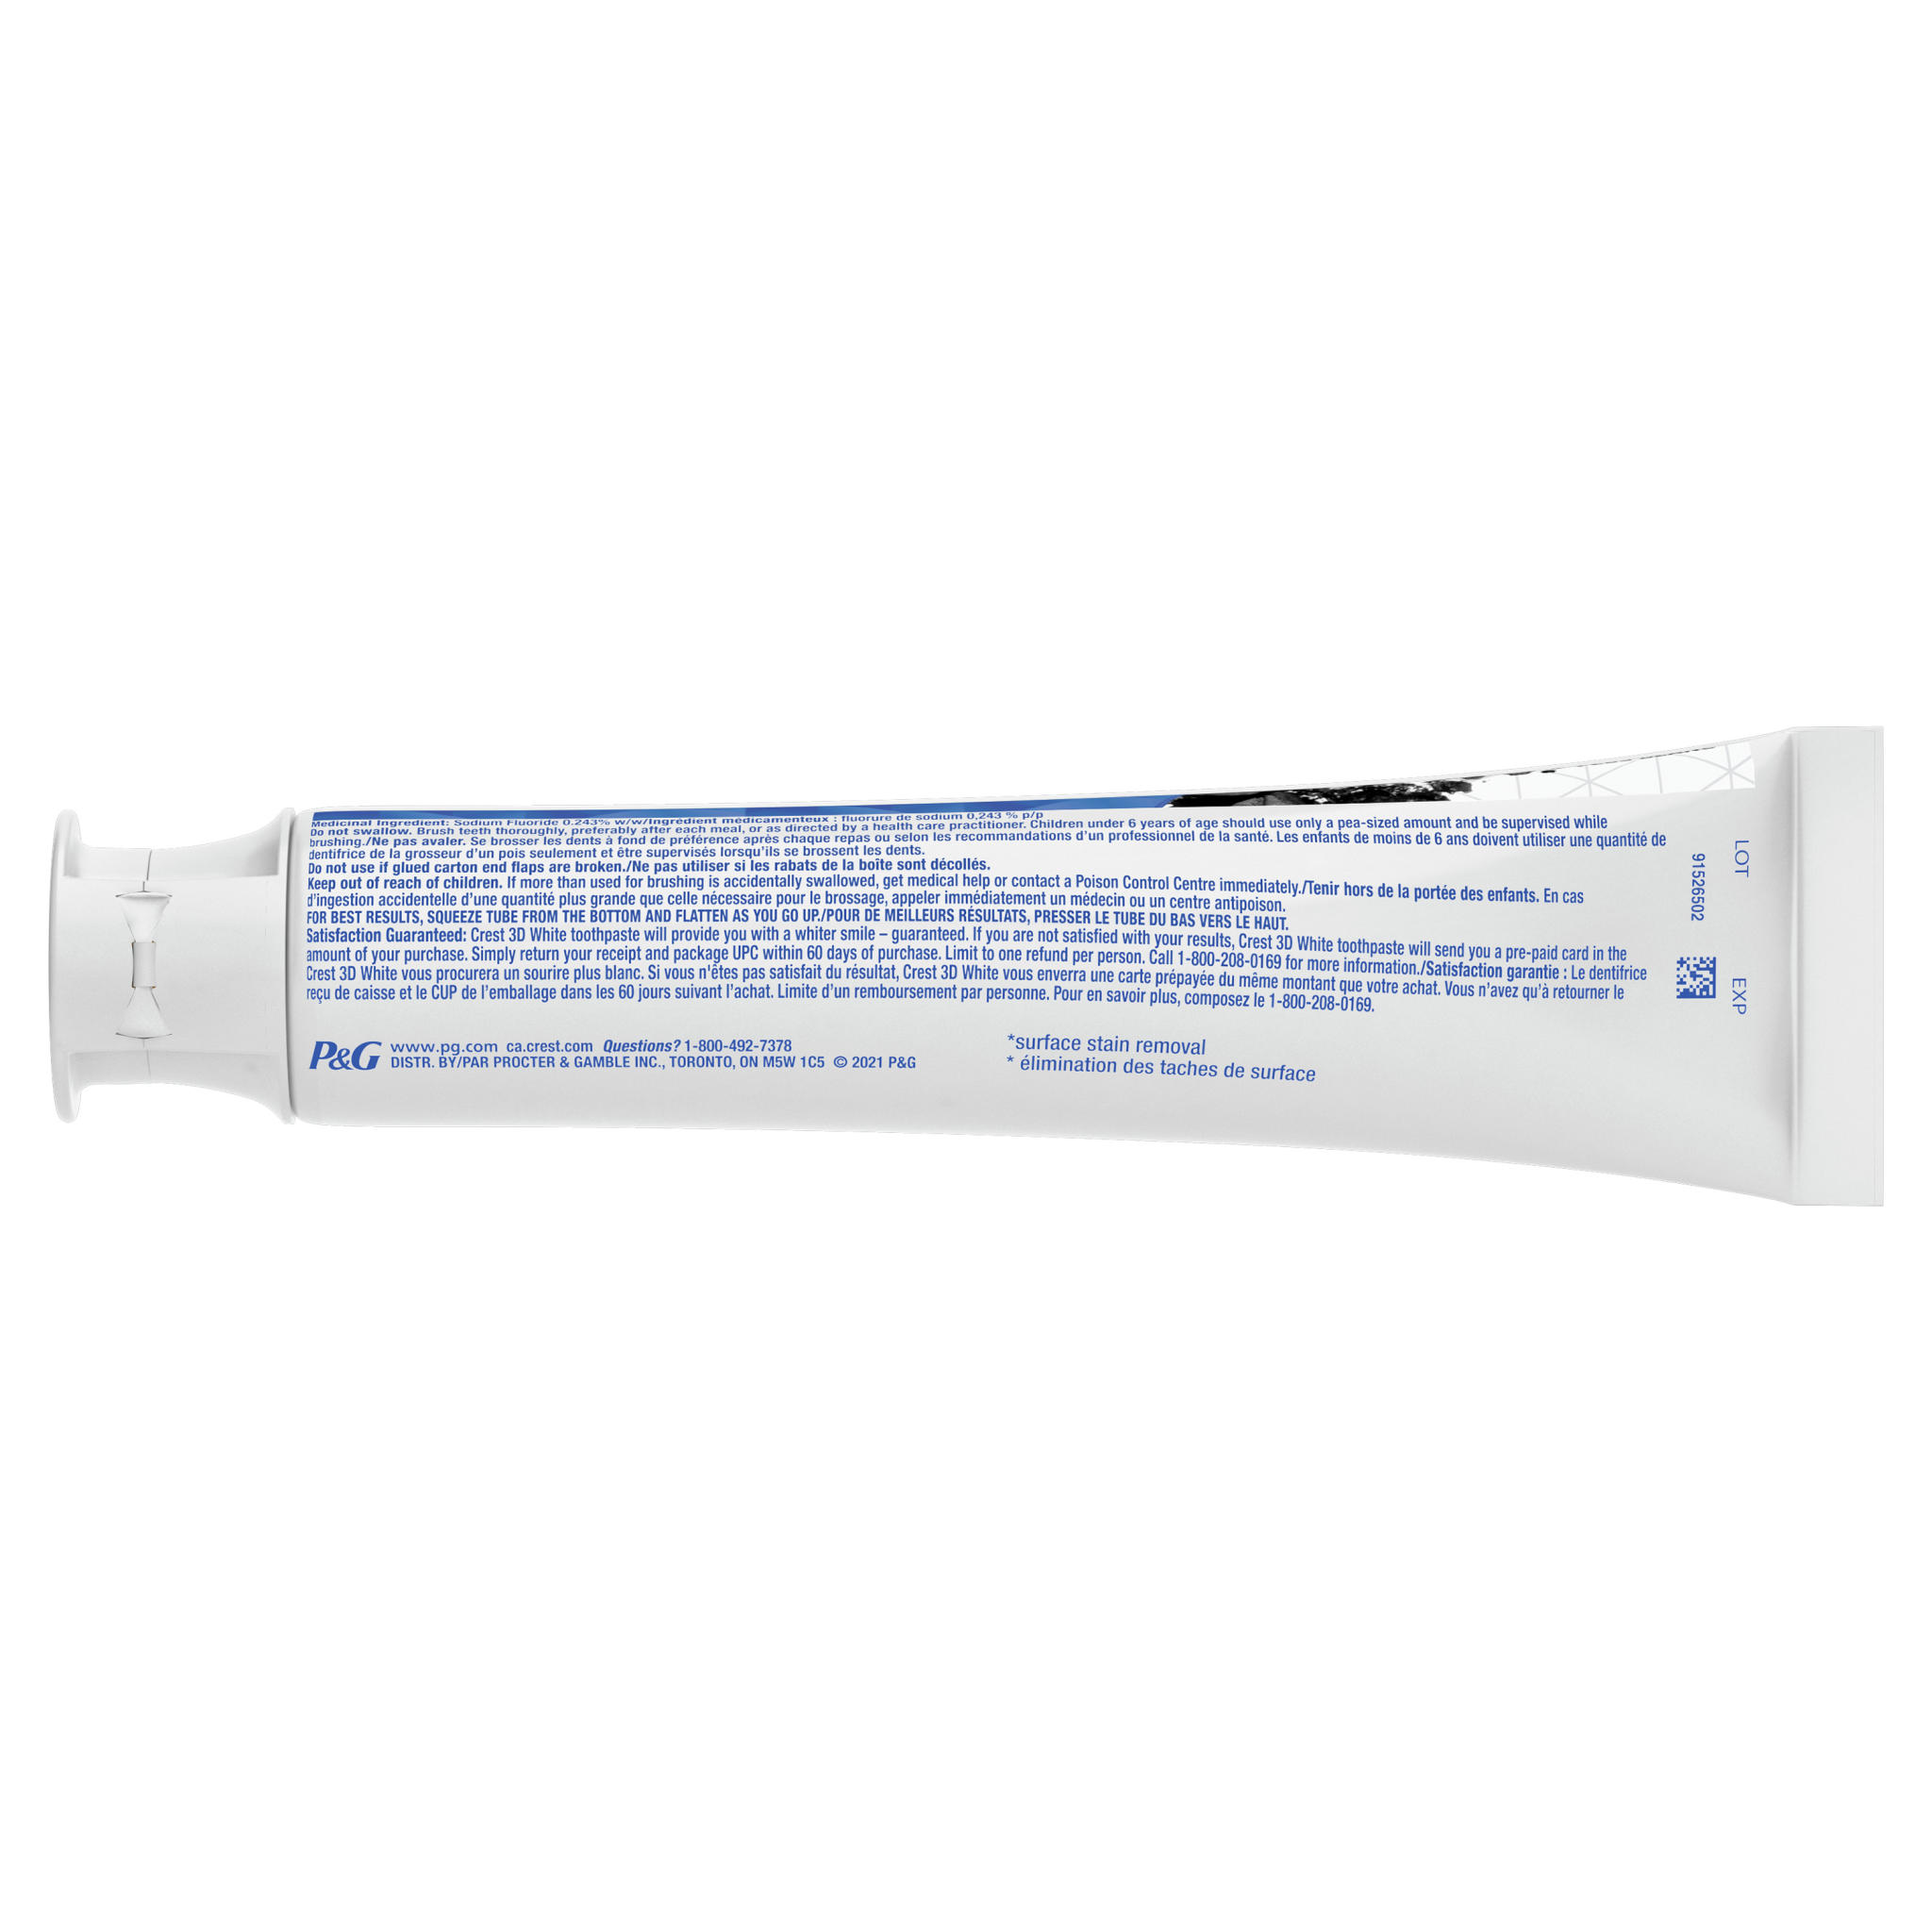 Crest 3D White, Charcoal Whitening Toothpaste, 115 mL - 1